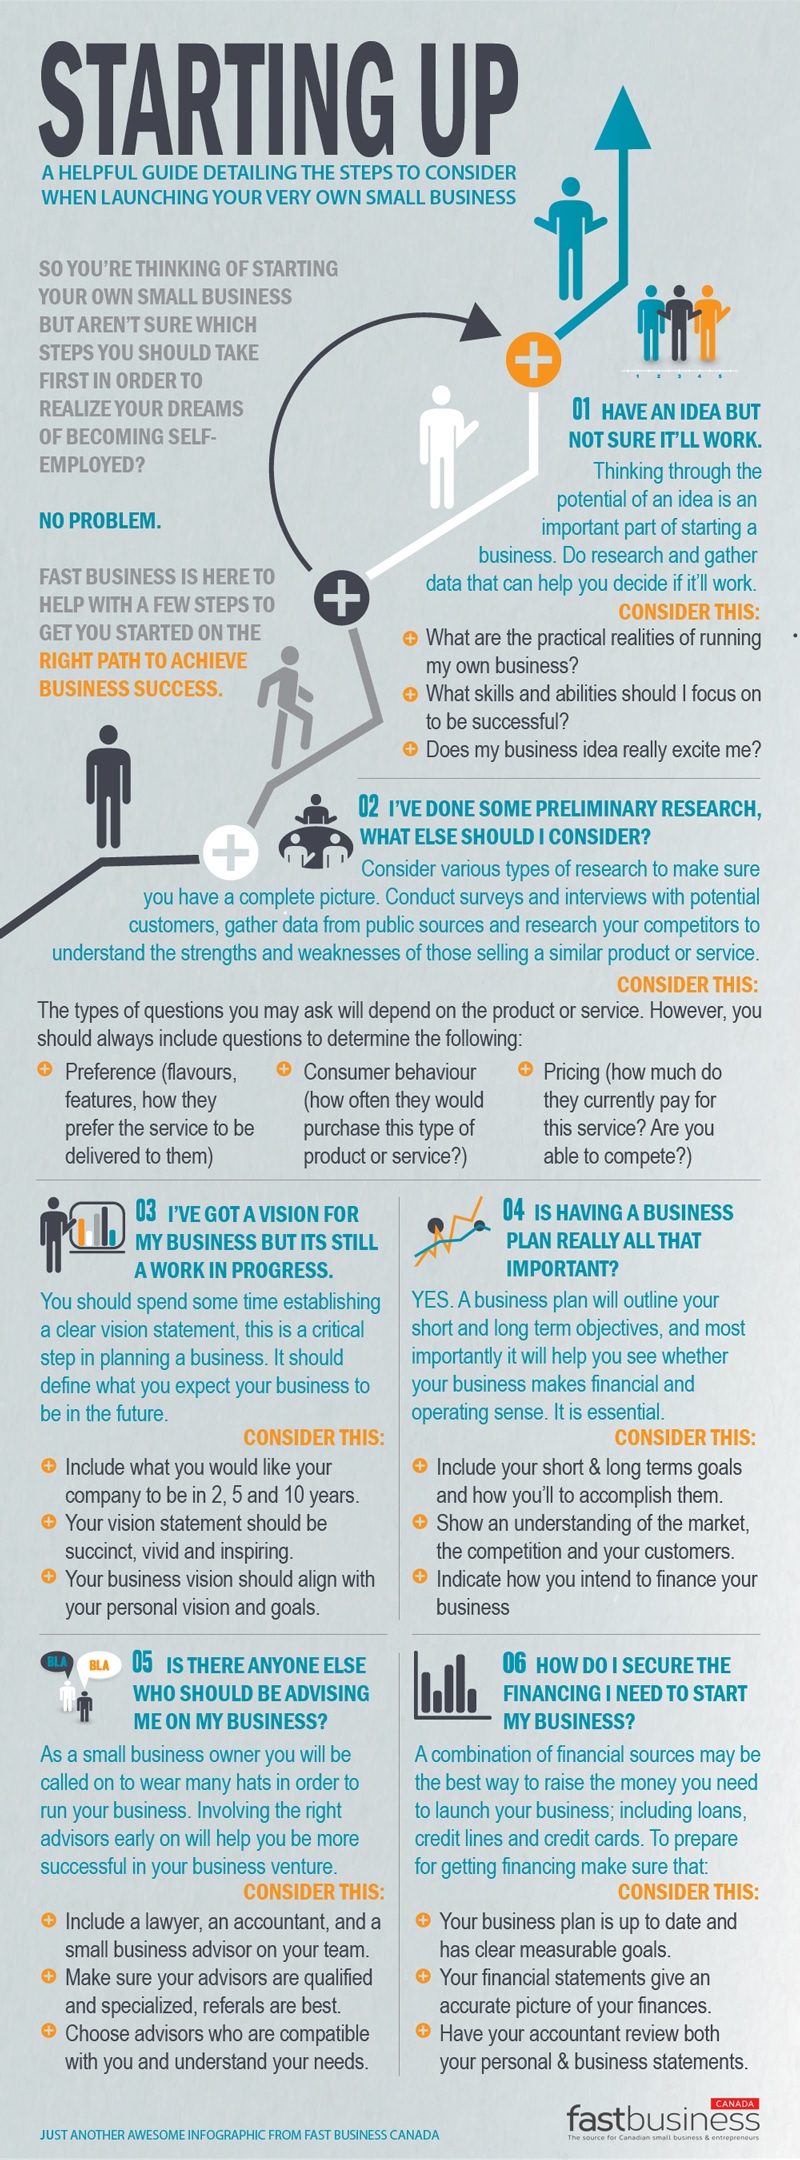 Starting Up Small Business Infographic